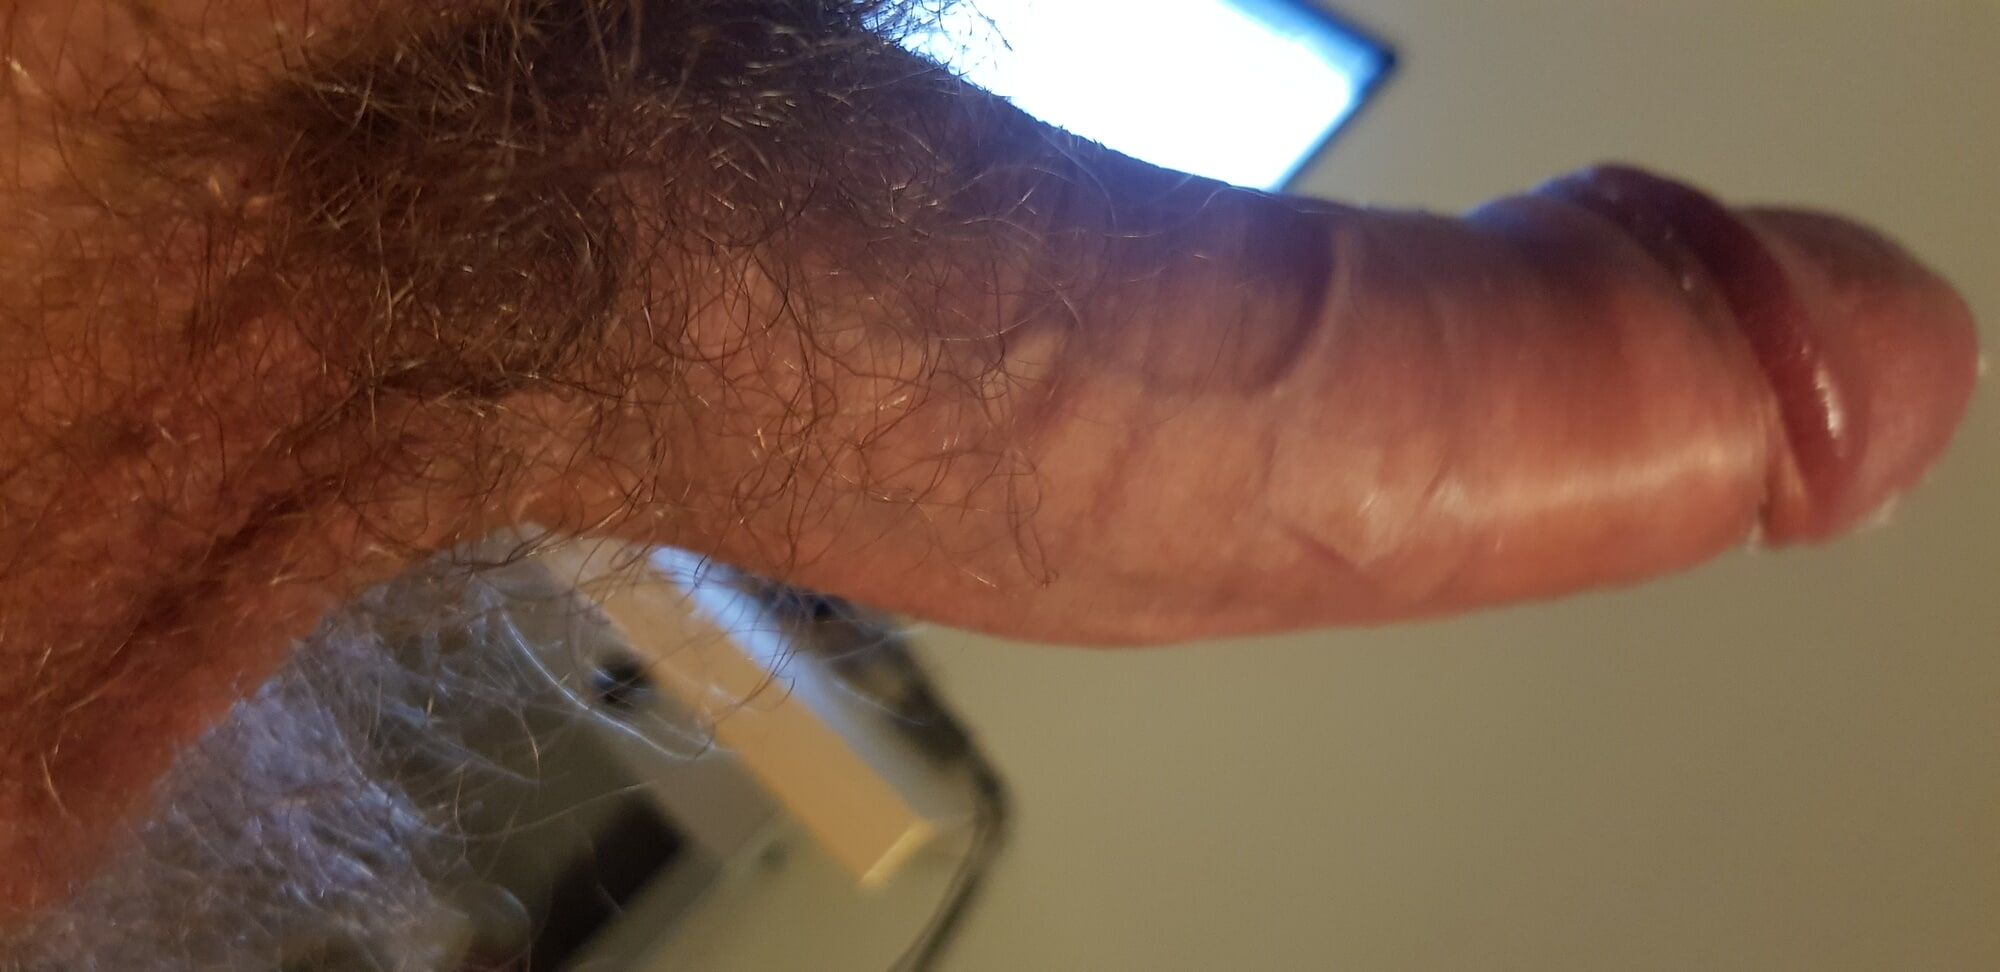 Hard and hairy uncut cock #3